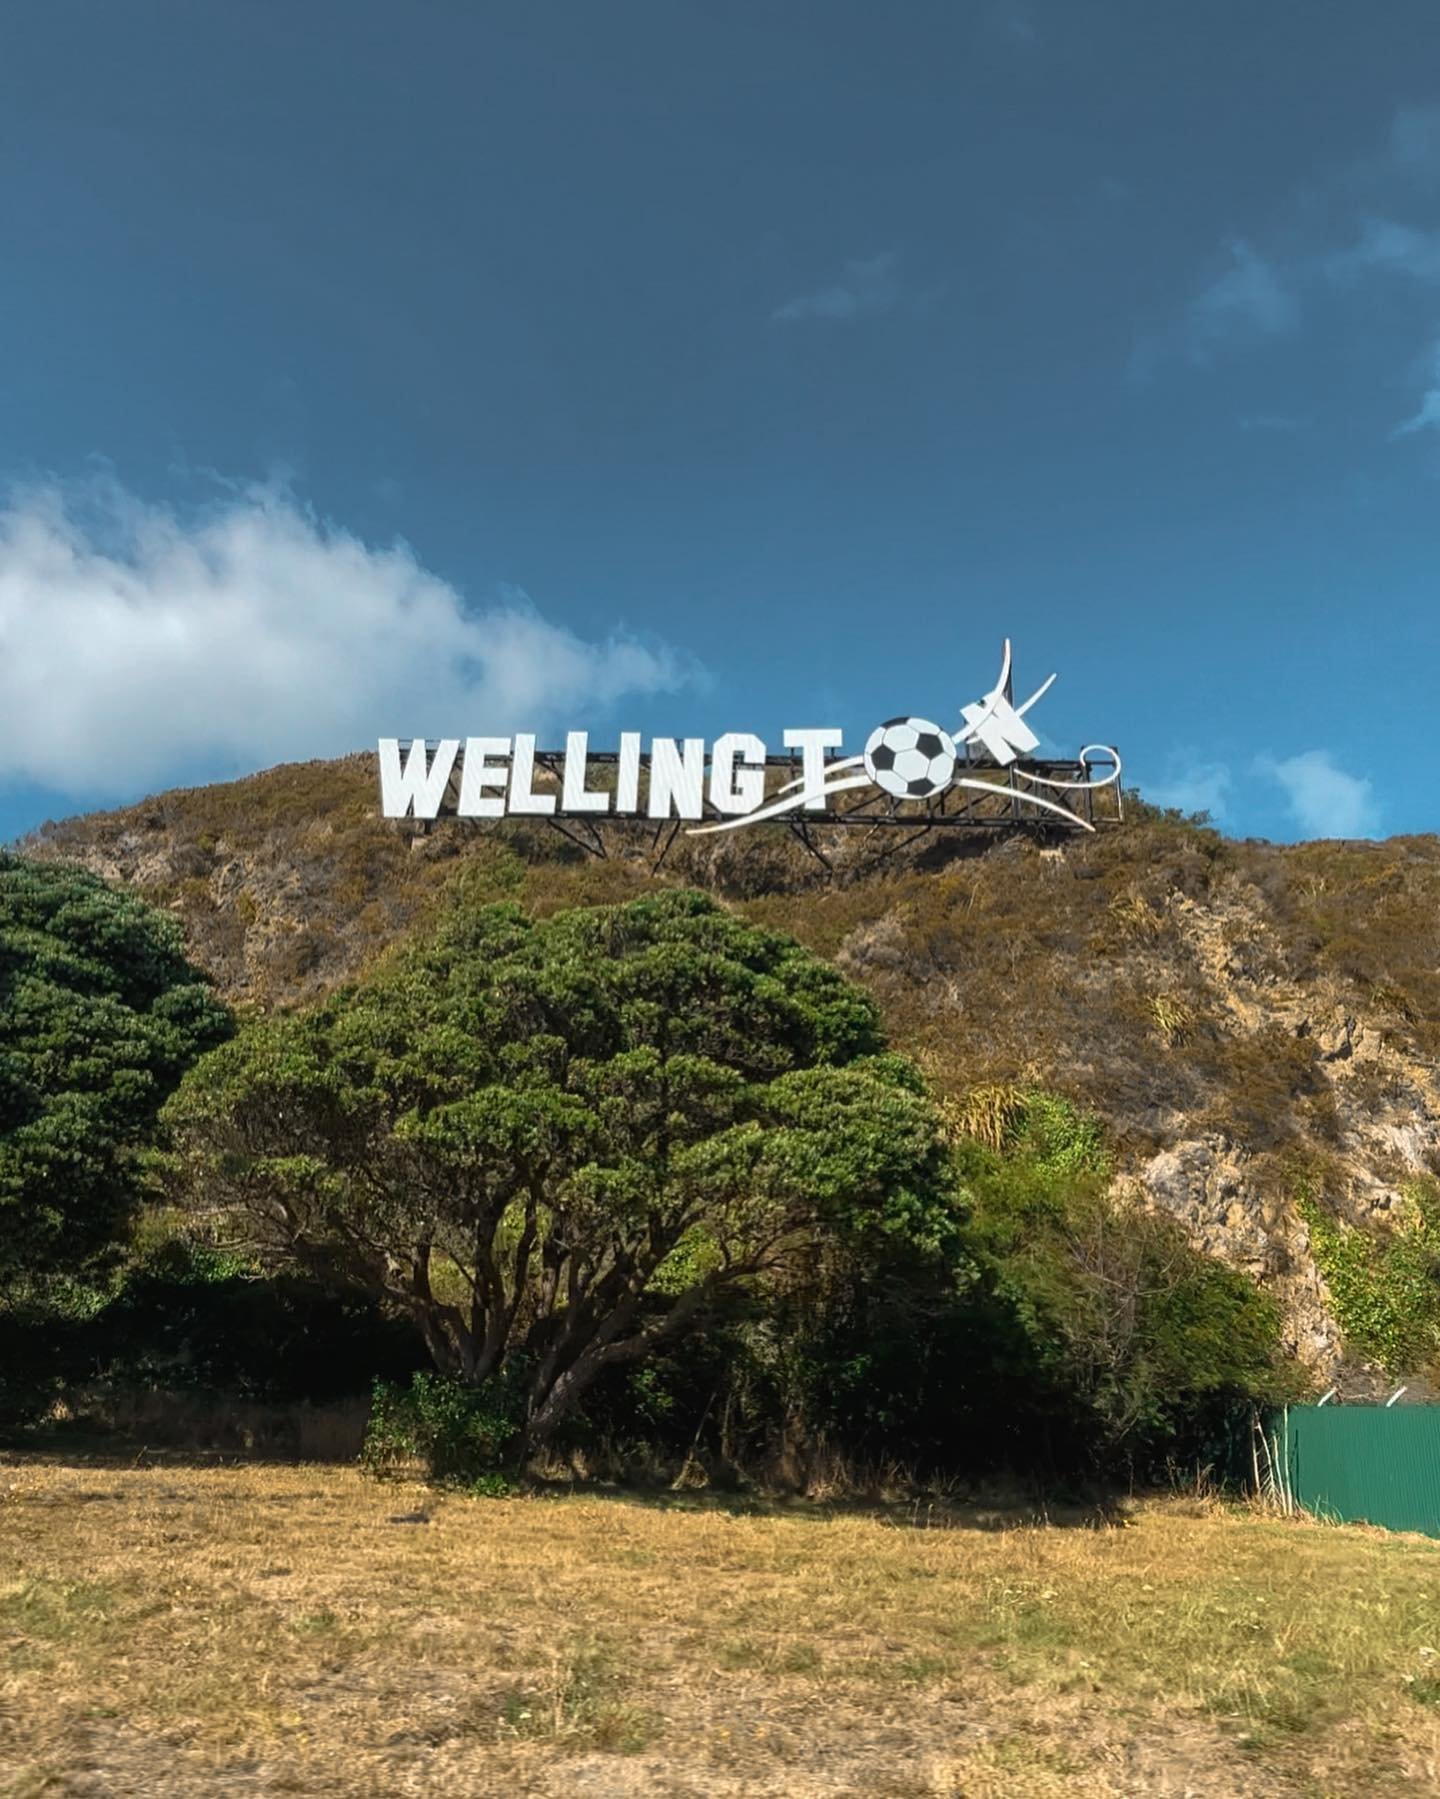 Heading to The Marion from Wellington Airport? One of the easiest ways of getting here is by bus!

Save this travel tip for your visit to The Marion ✌️